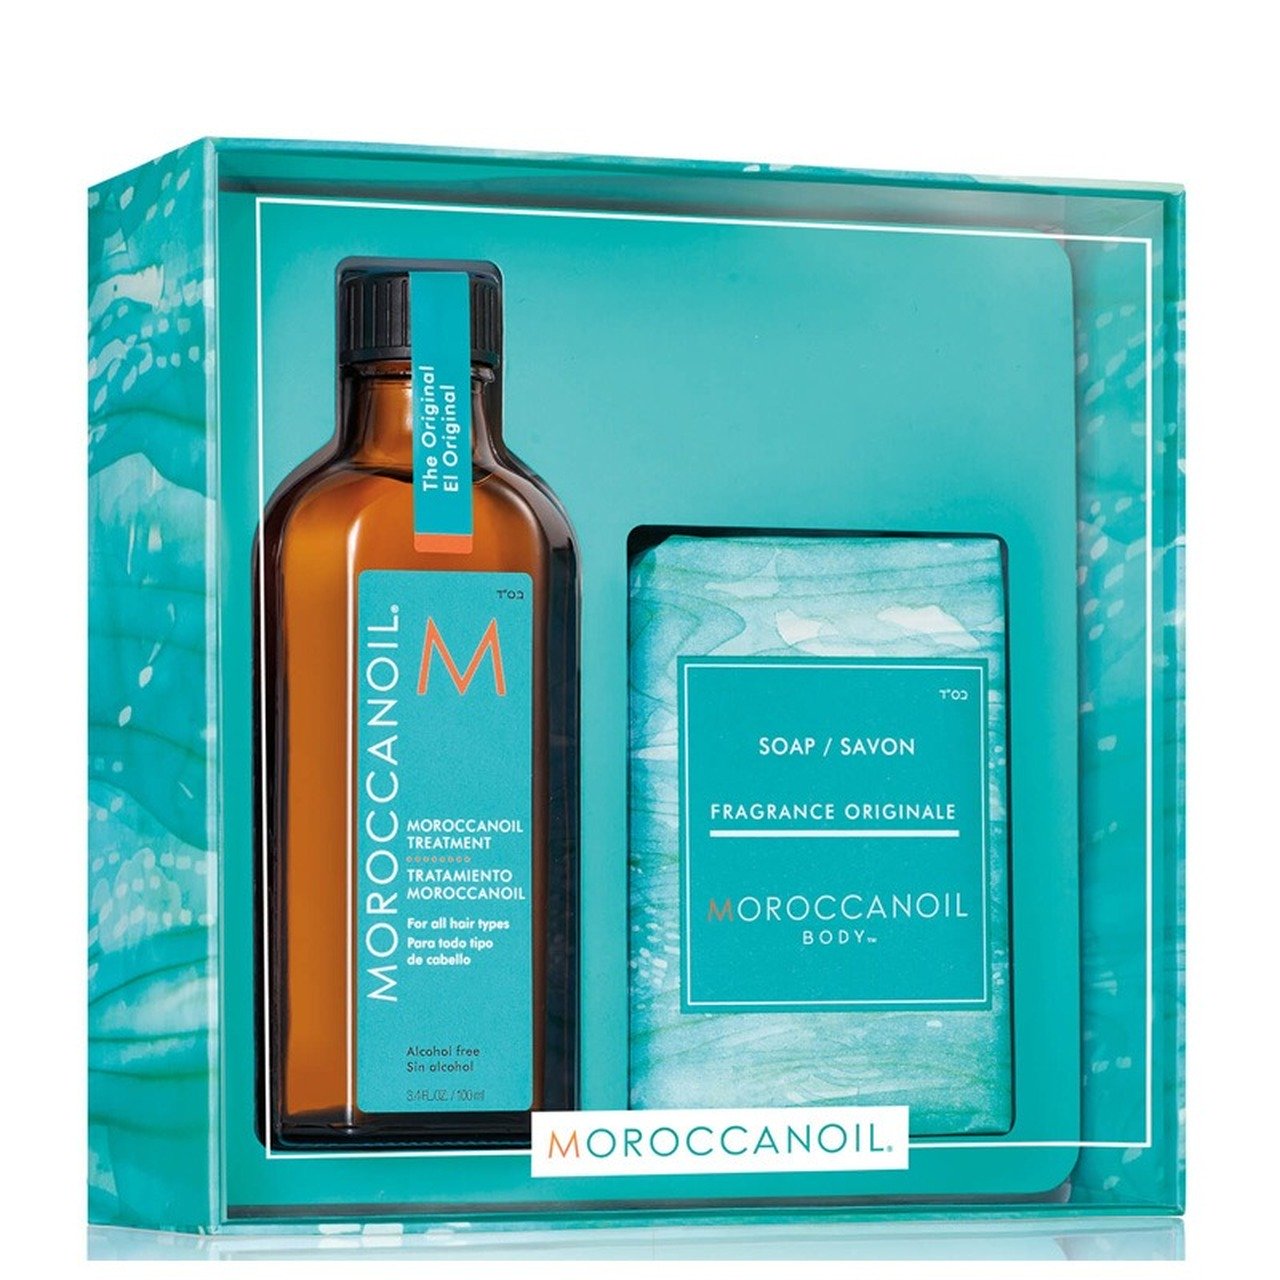 Moroccanoil Treatment Oil 100ml with FREE Soap Christmas Gifts at Hugh Campbell Limerick Hair Salons